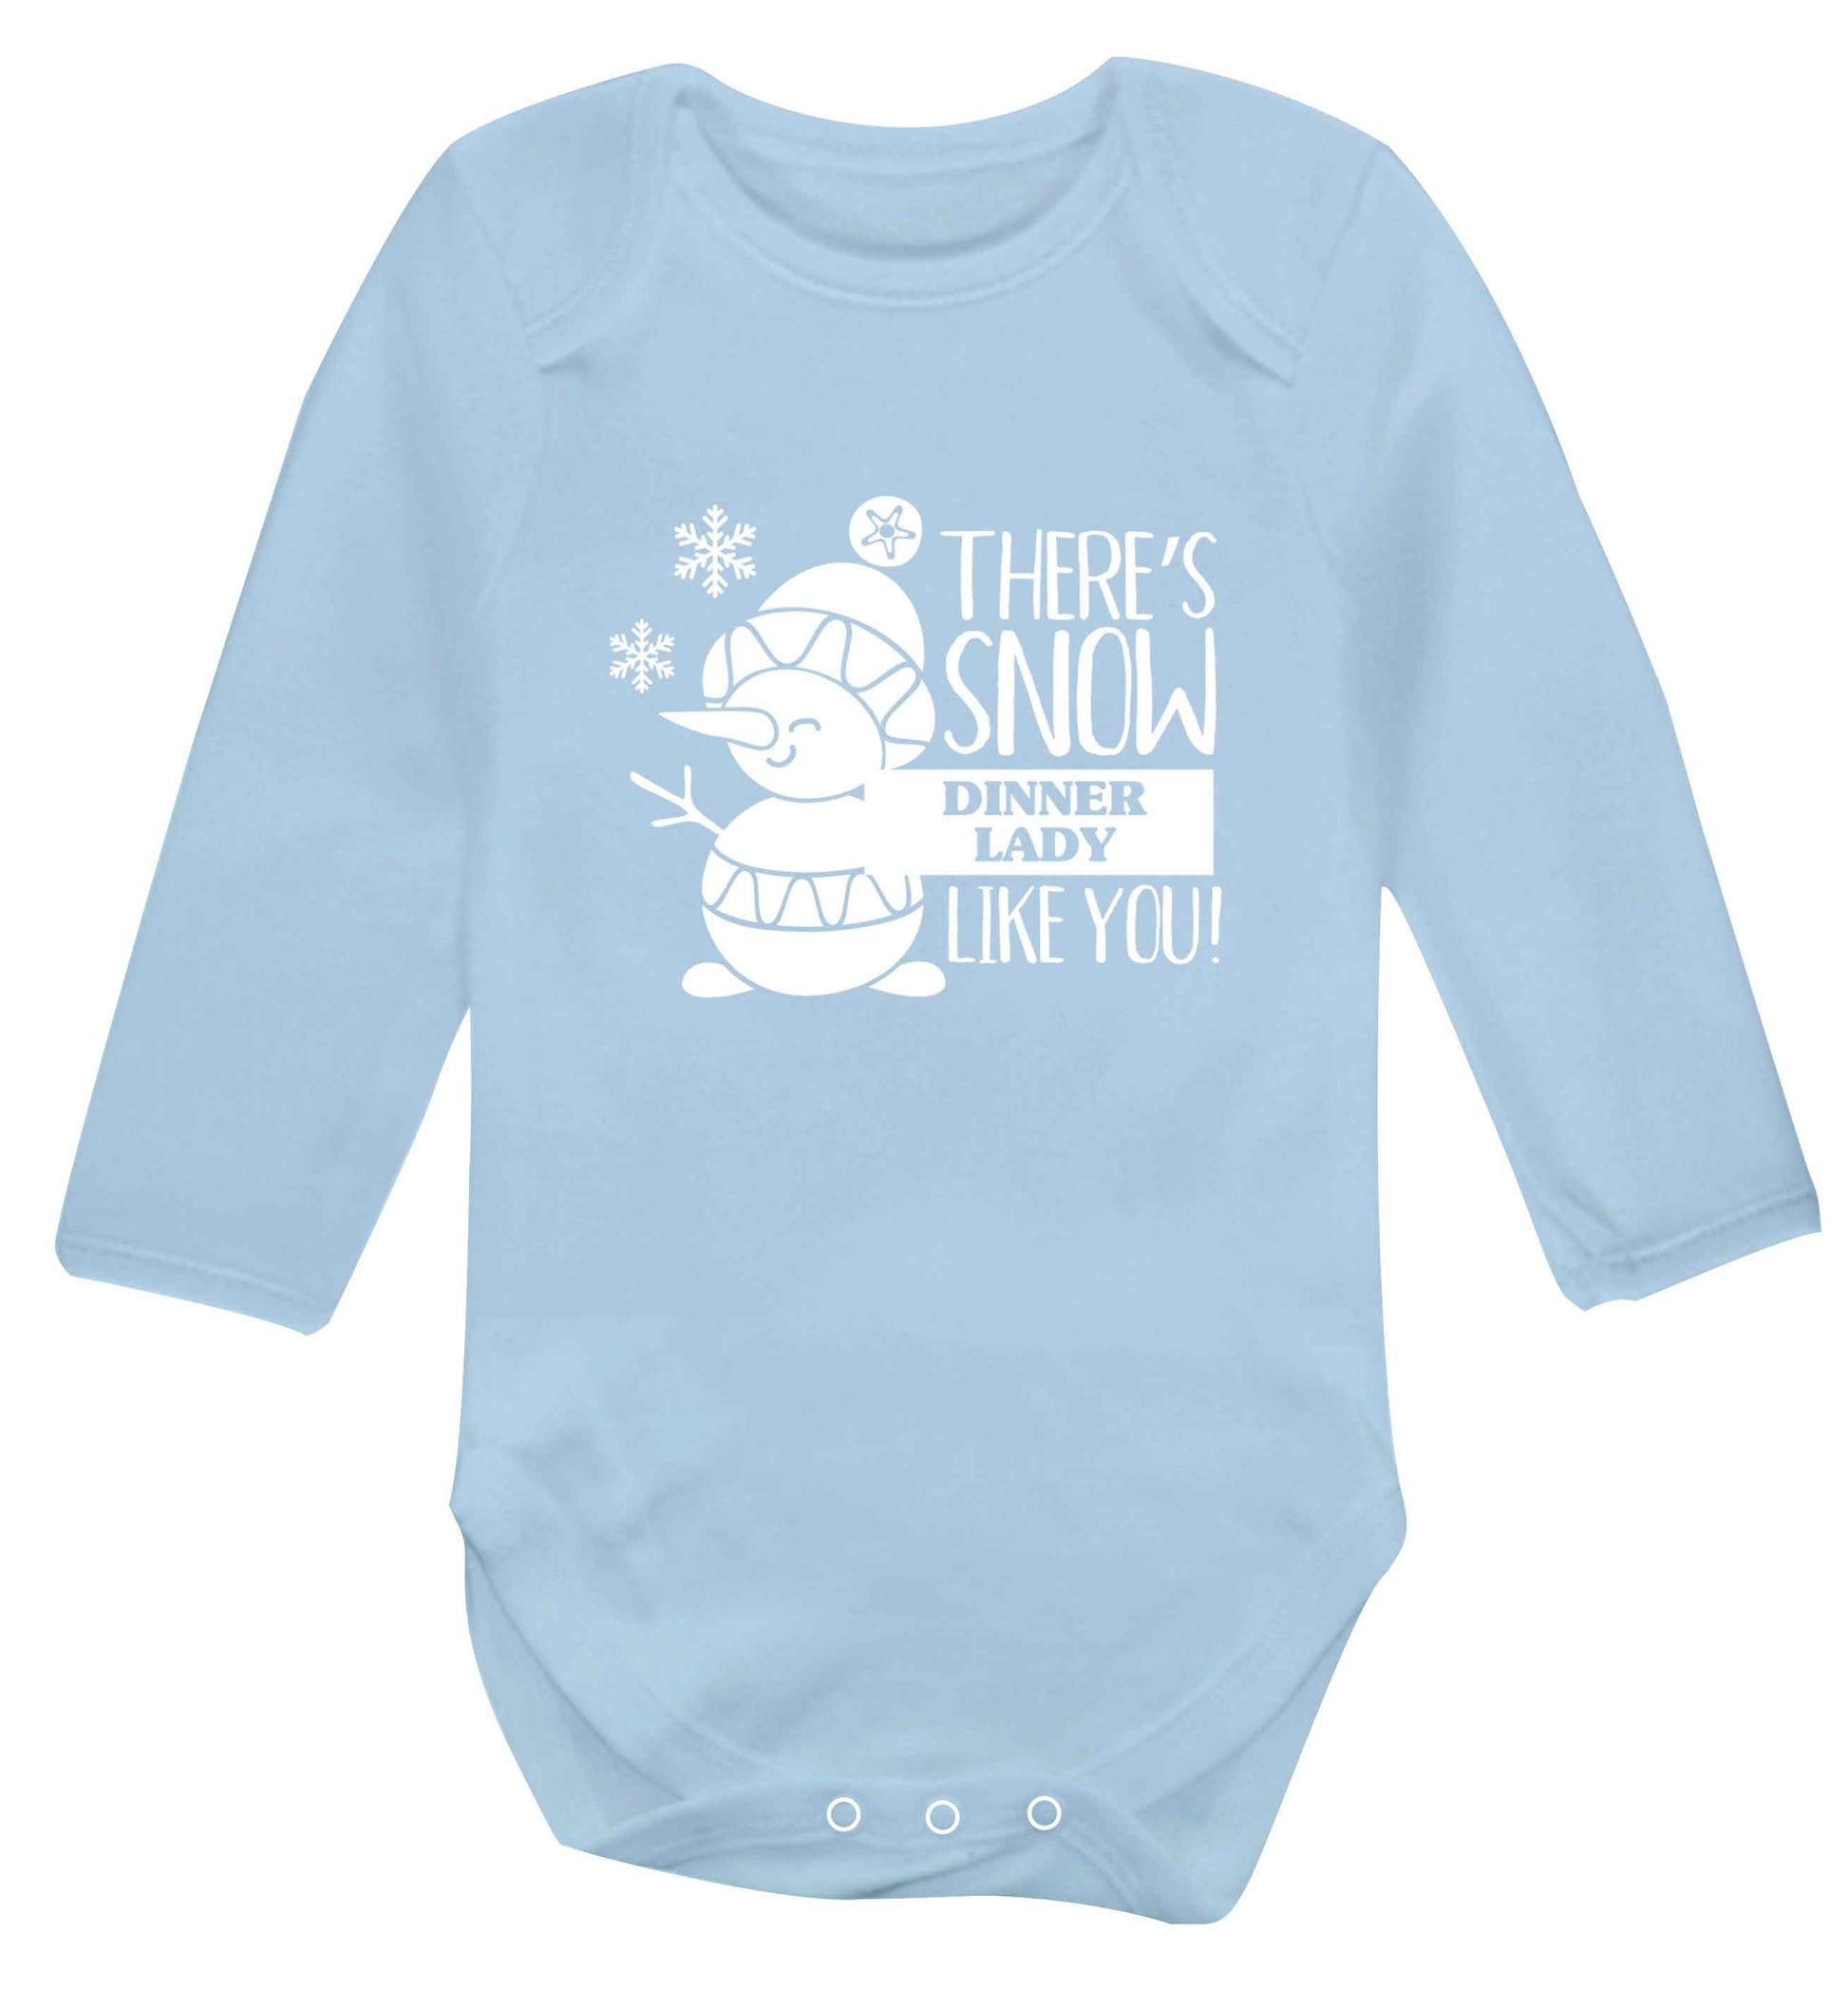 There's snow dinner lady like you baby vest long sleeved pale blue 6-12 months